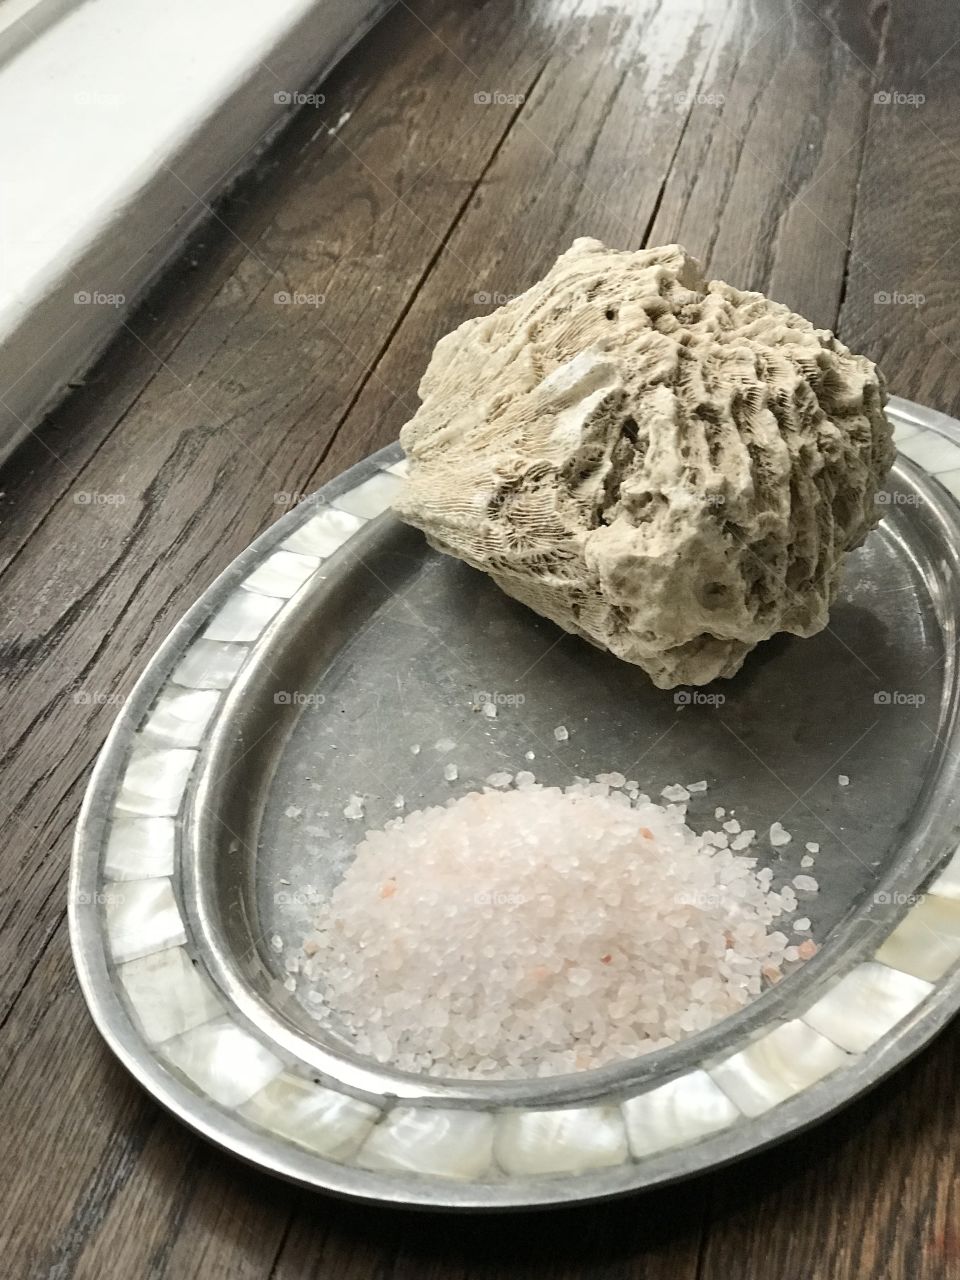 Salt and tray